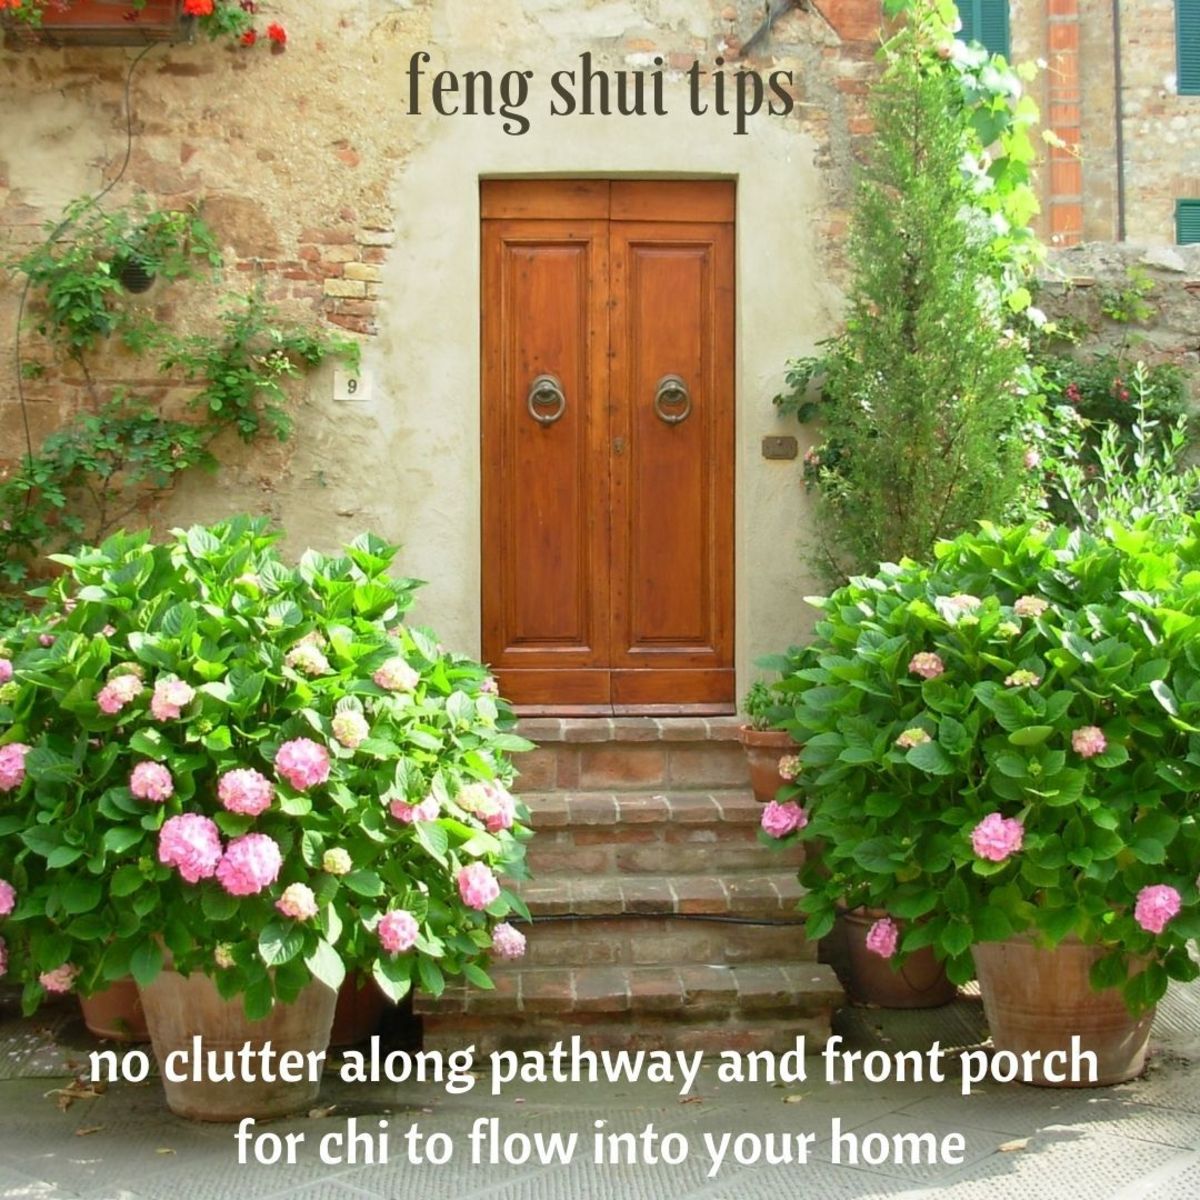 For good Feng Shui, always keep the pathway and front porch clear of clutter. Remove obstacles and broken objects to allow chi and good vibes to flow into your home